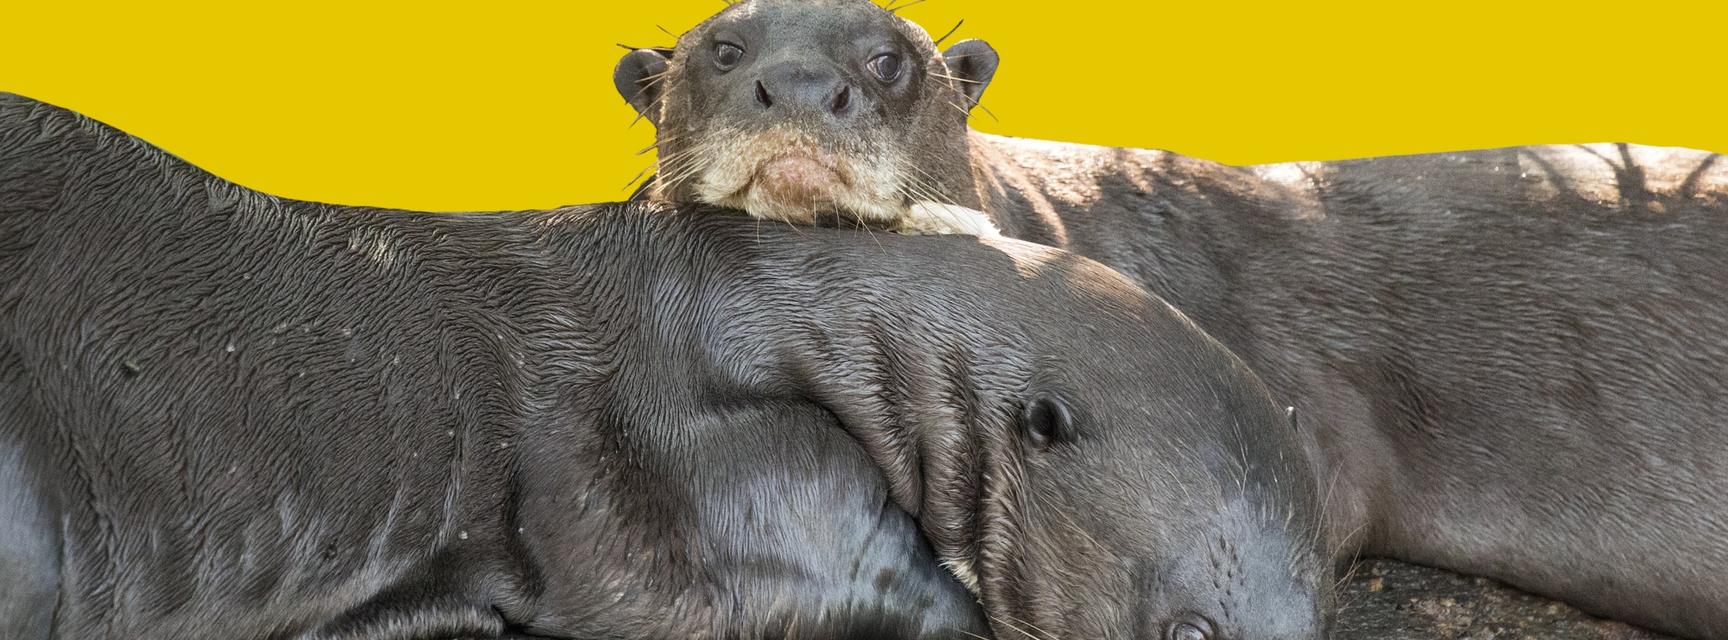 Two giant otters resting on a branch